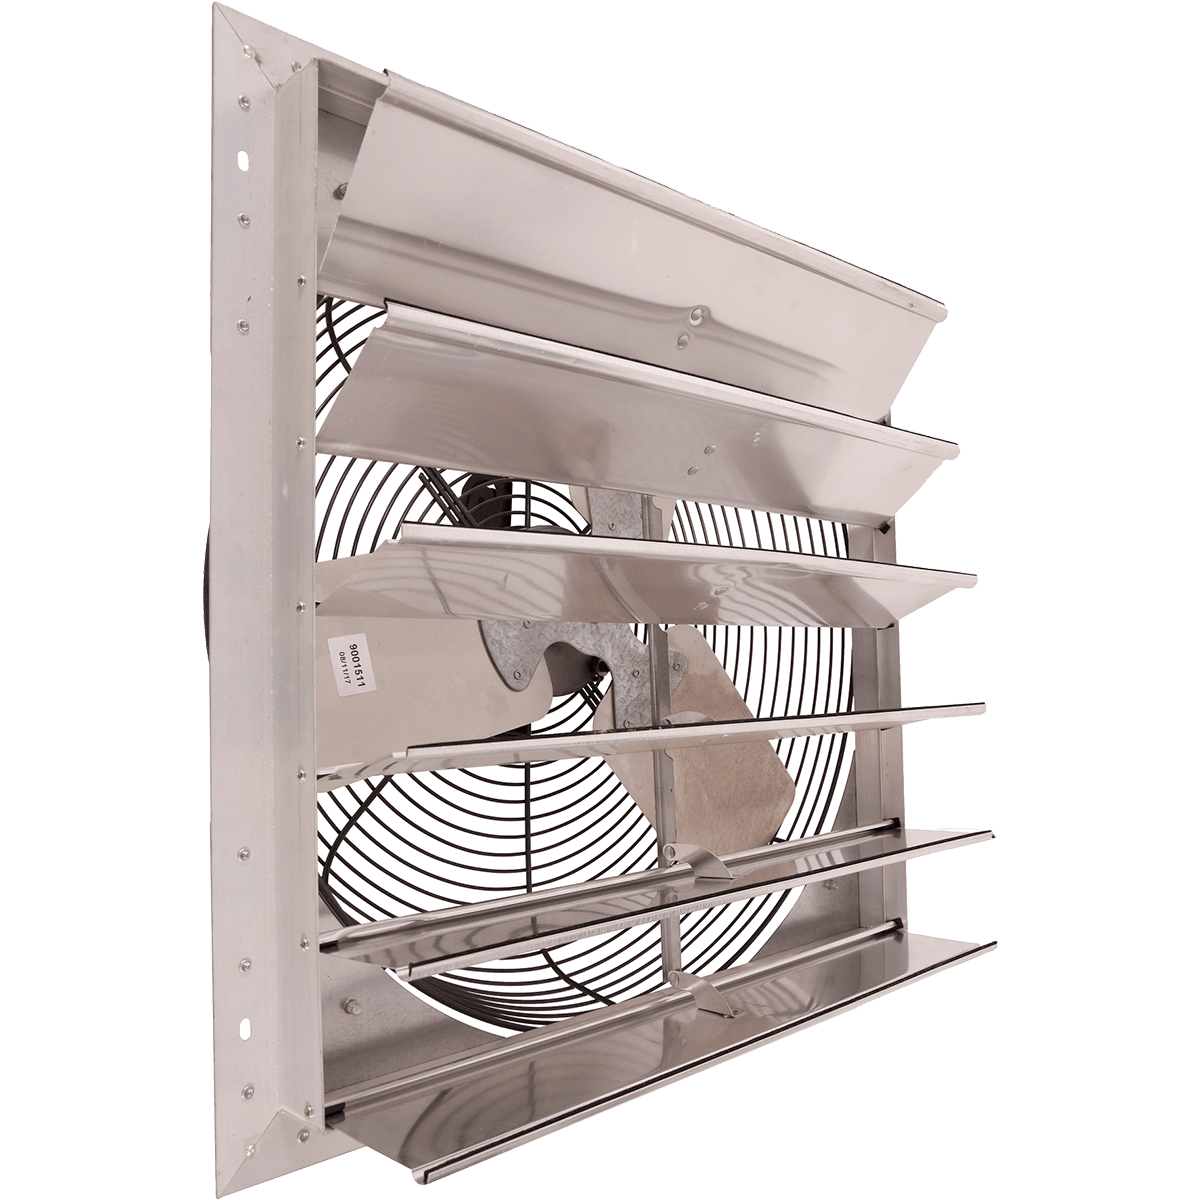 Hessaire 24 in 4600 CFM Power Shutter Mounted Variable Speed Exhaust Fan 